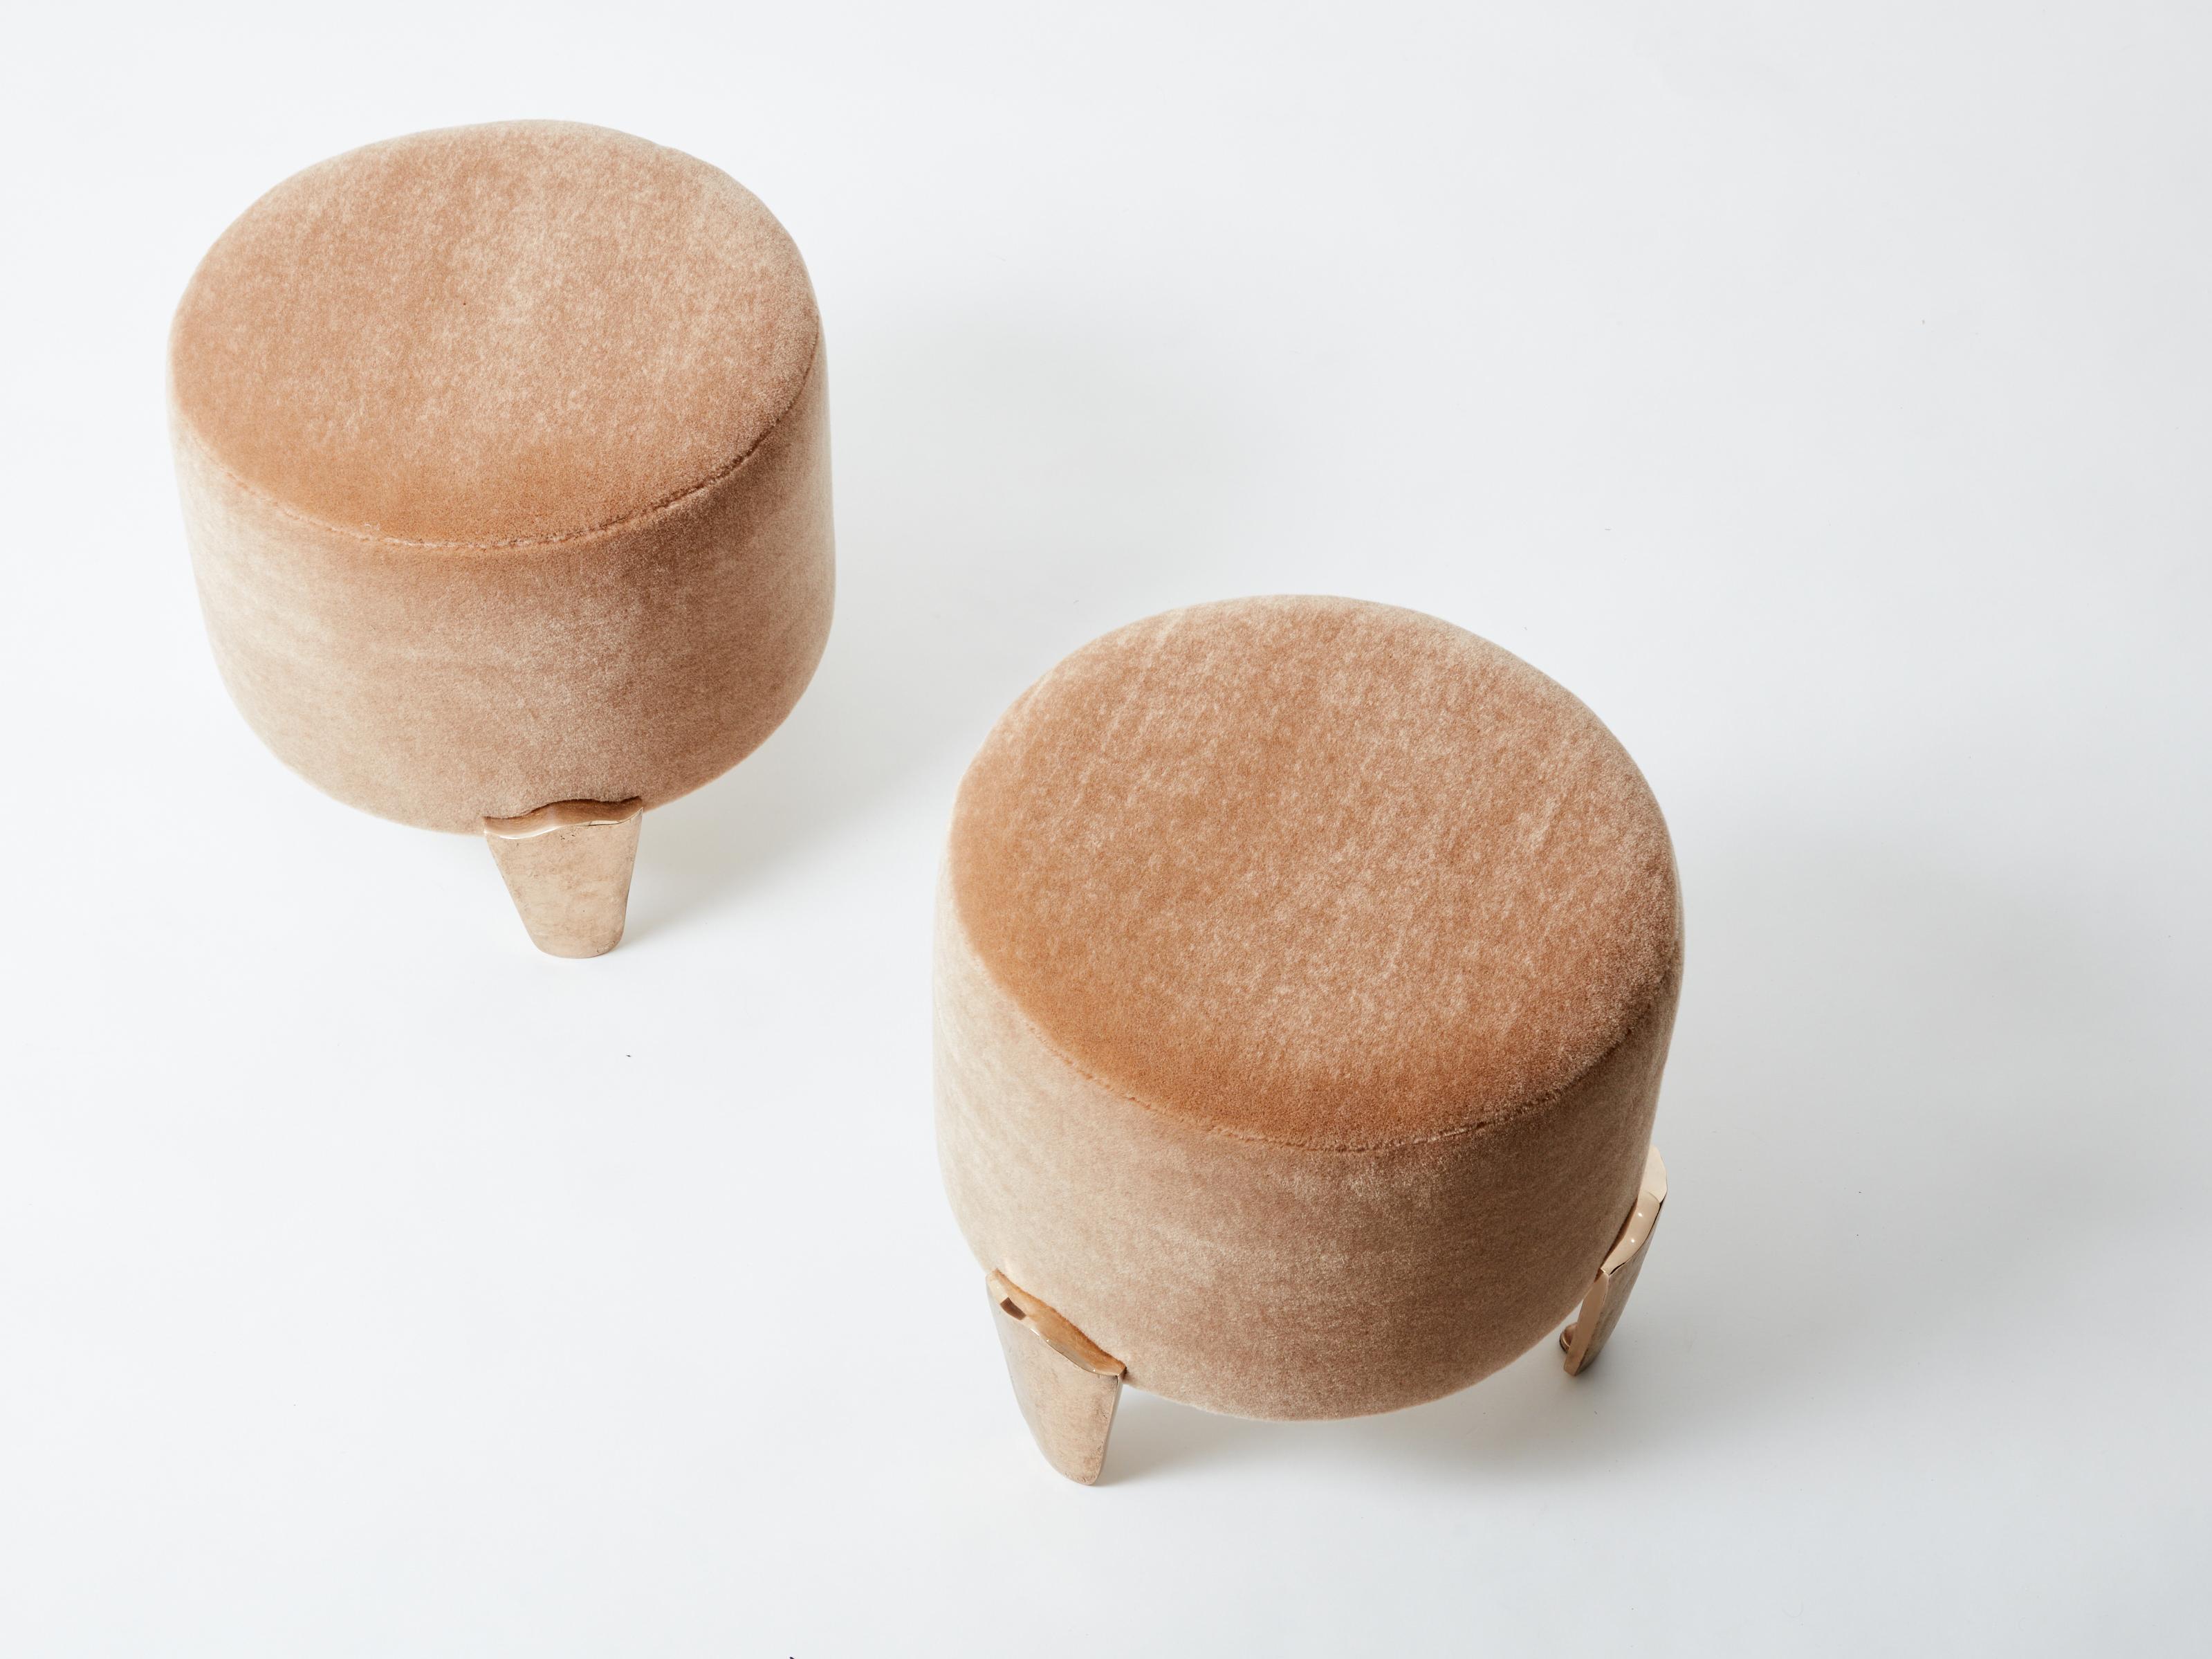 This is a beautiful pair of stools by Elizabeth Garouste & Mattia Bonetti, model Koala, with solid bronze feet, fully restored and reupholstered. Garouste & Bonetti began their collaboration and gained global recognition for their interior design of